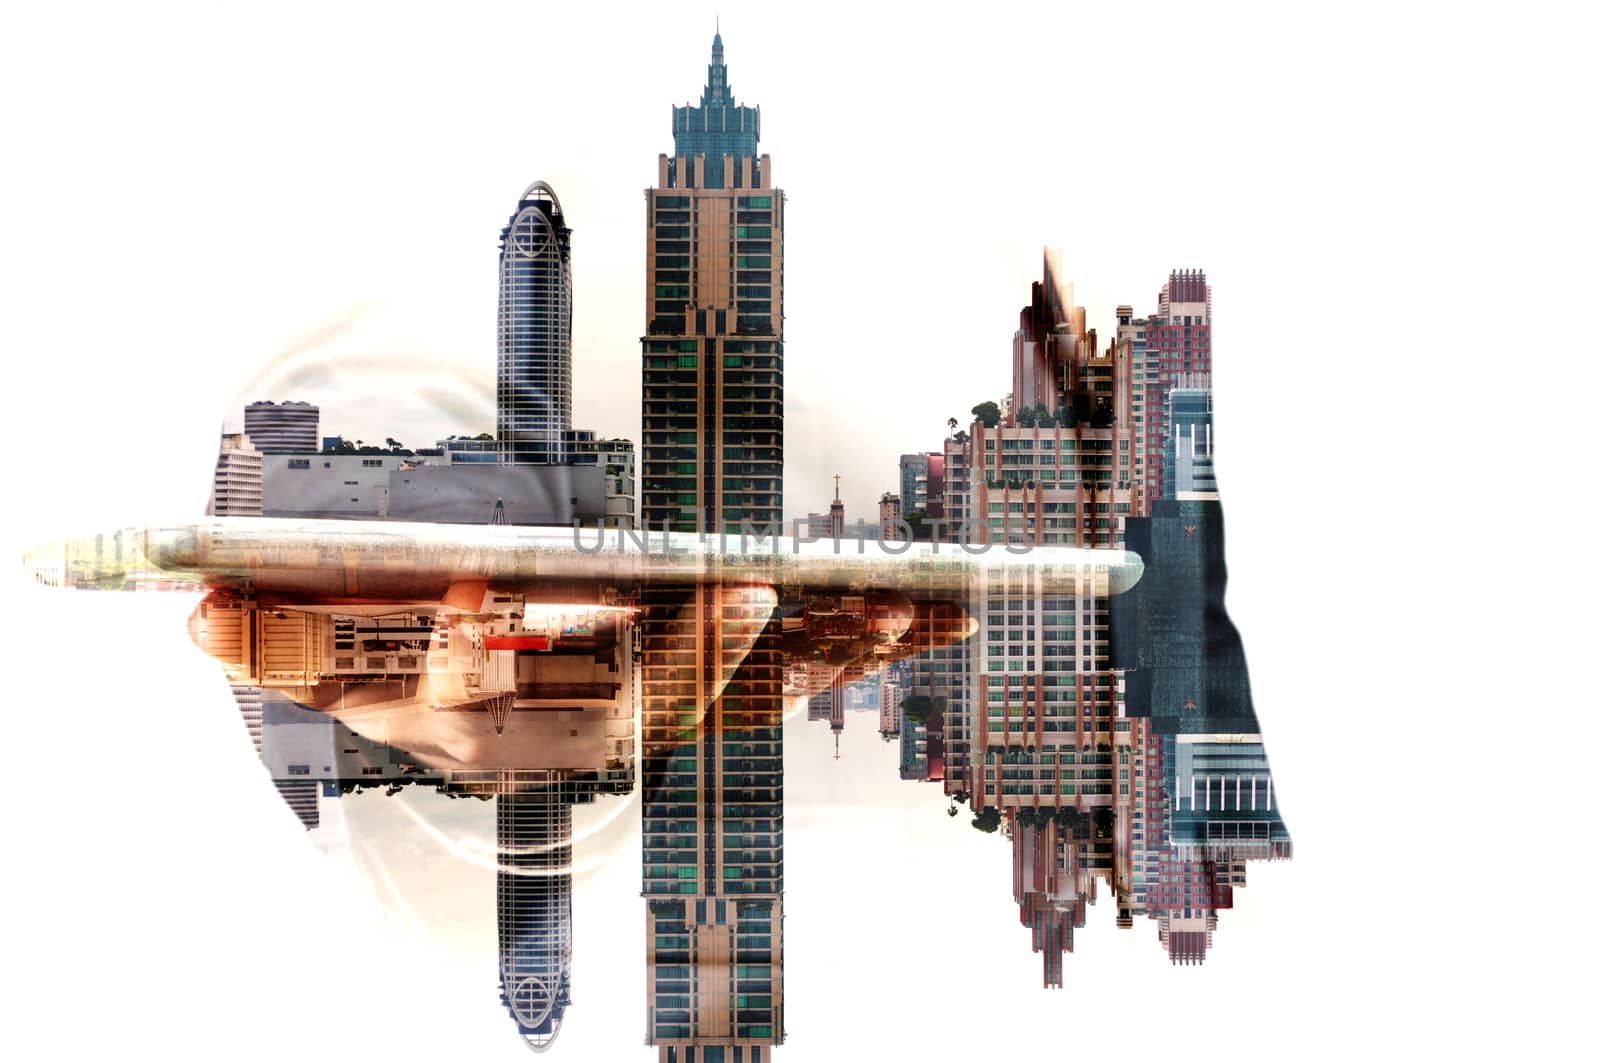 Double Exposure Hand of Businessman and City Building as Digital Business Technology Concept